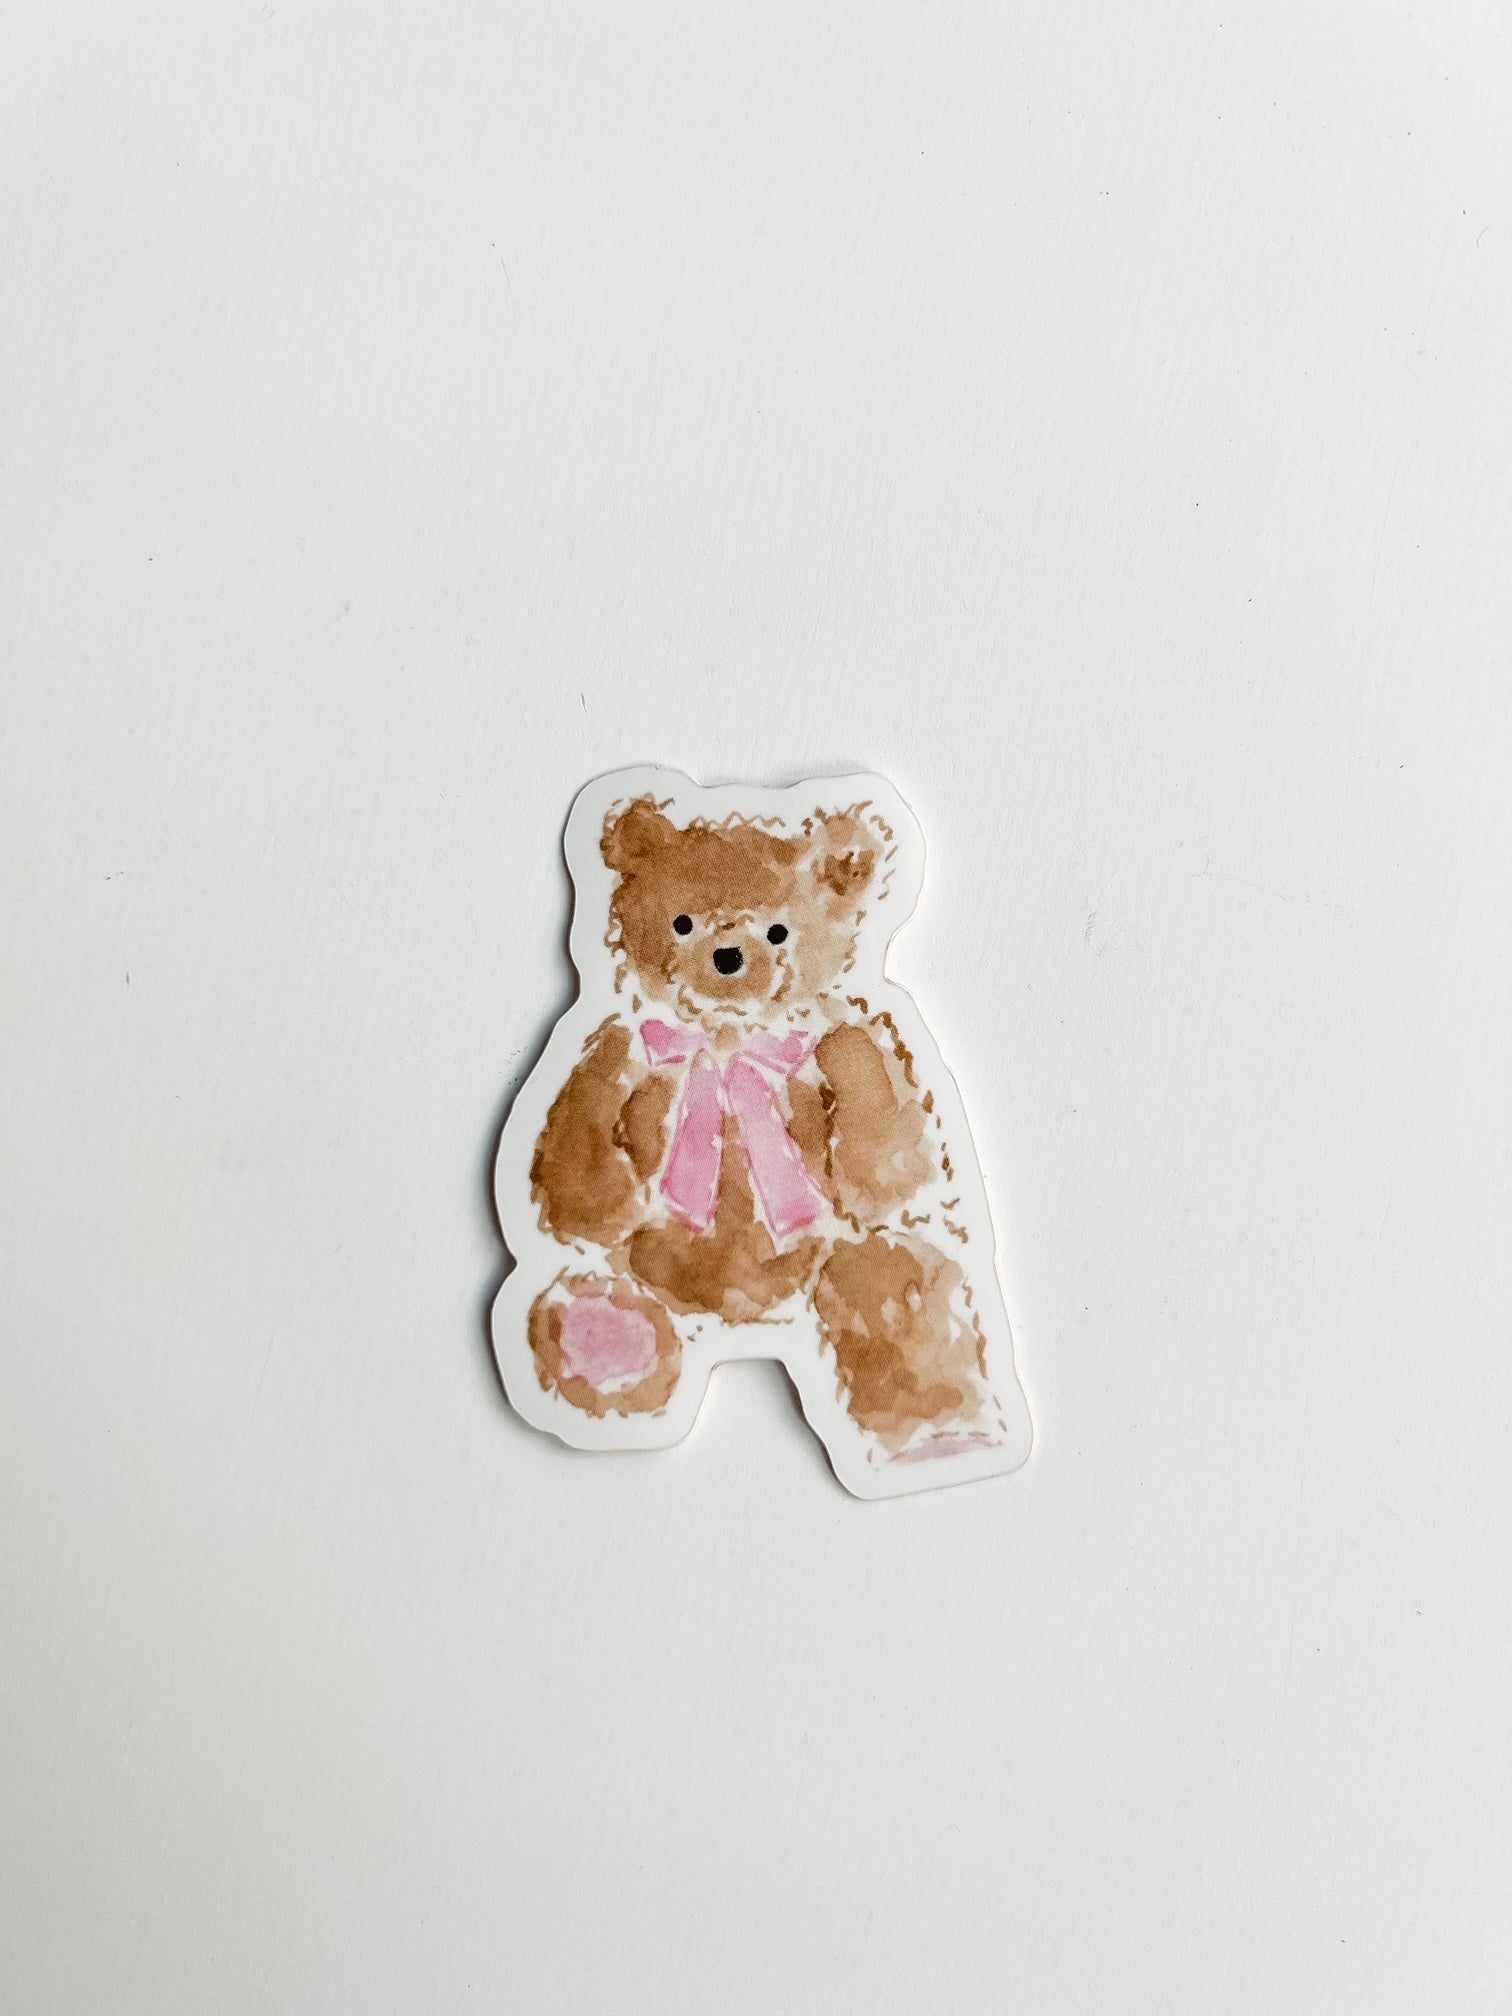 Watercolor Teddy Bear sticker with pink bow